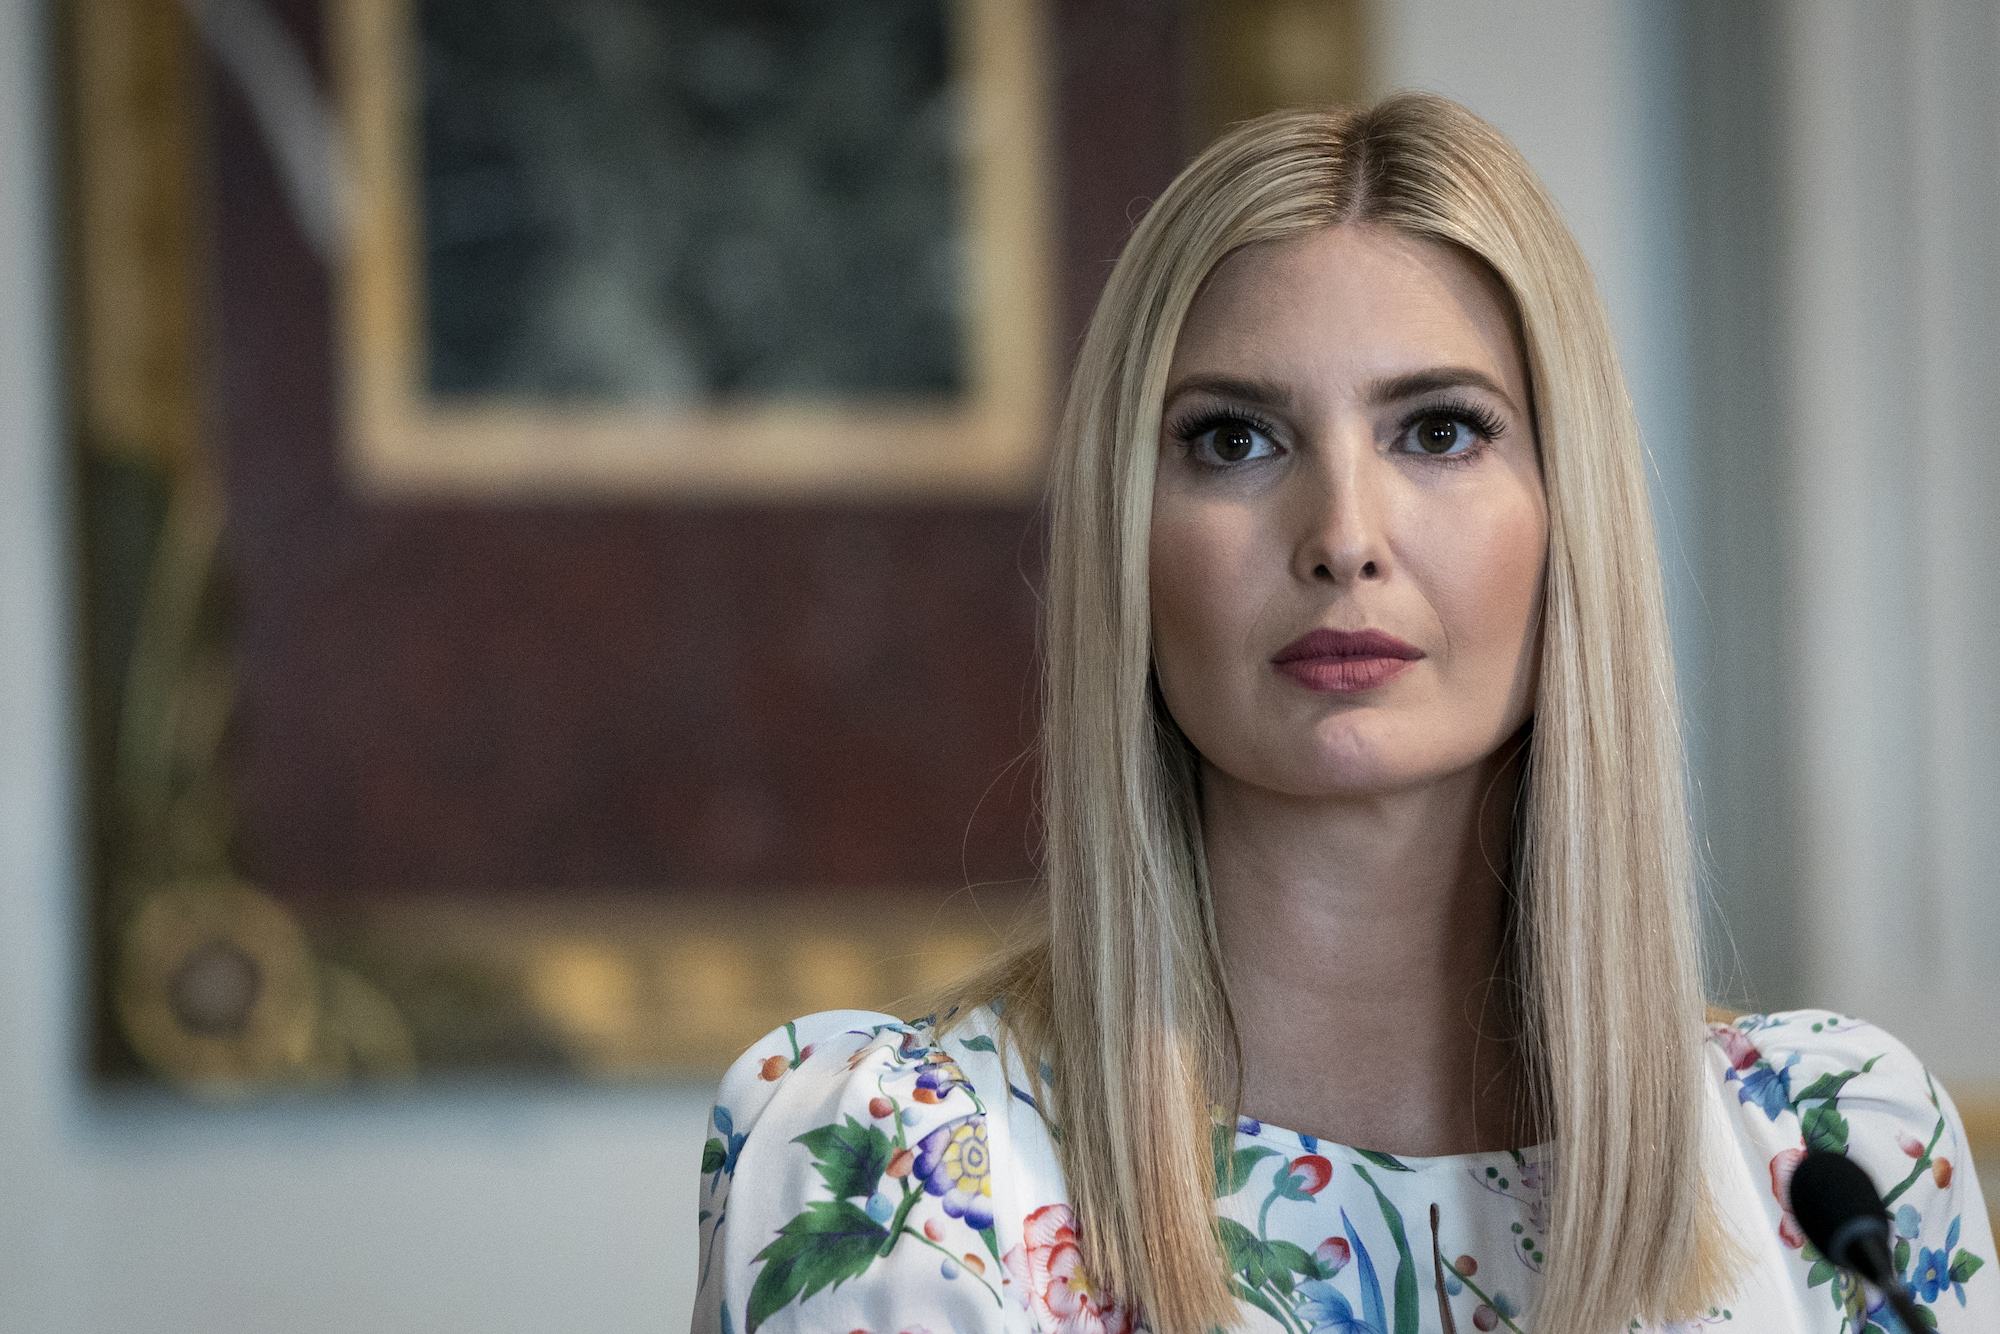 Ivanka Trump listens during an event in Washington, DC, on August 4, 2020.